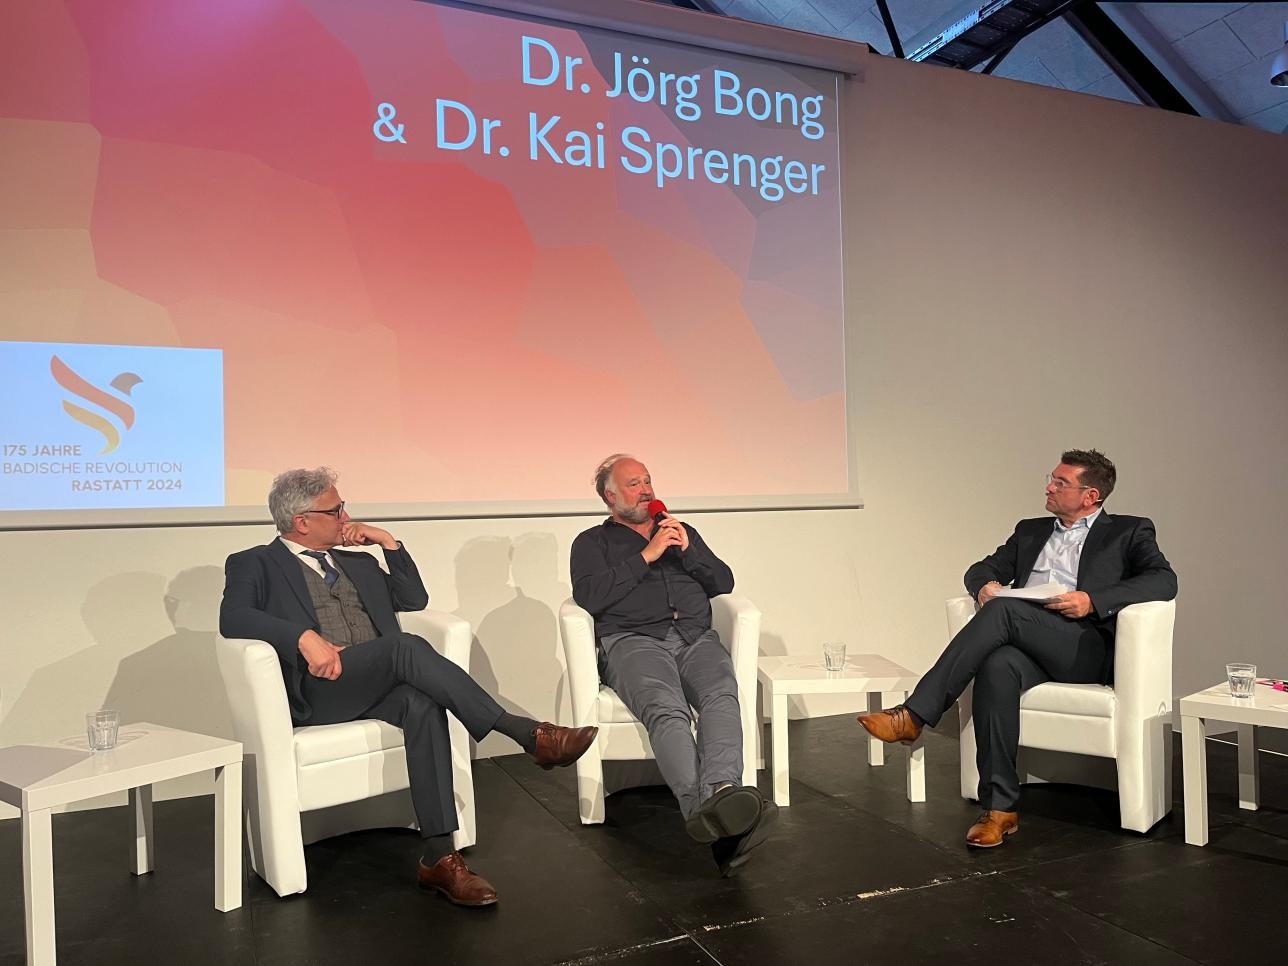 Dr. Kai Sprenger, Dr. Jörg Bong and moderator Jochen Graf on stage in the Reithalle during a panel discussion